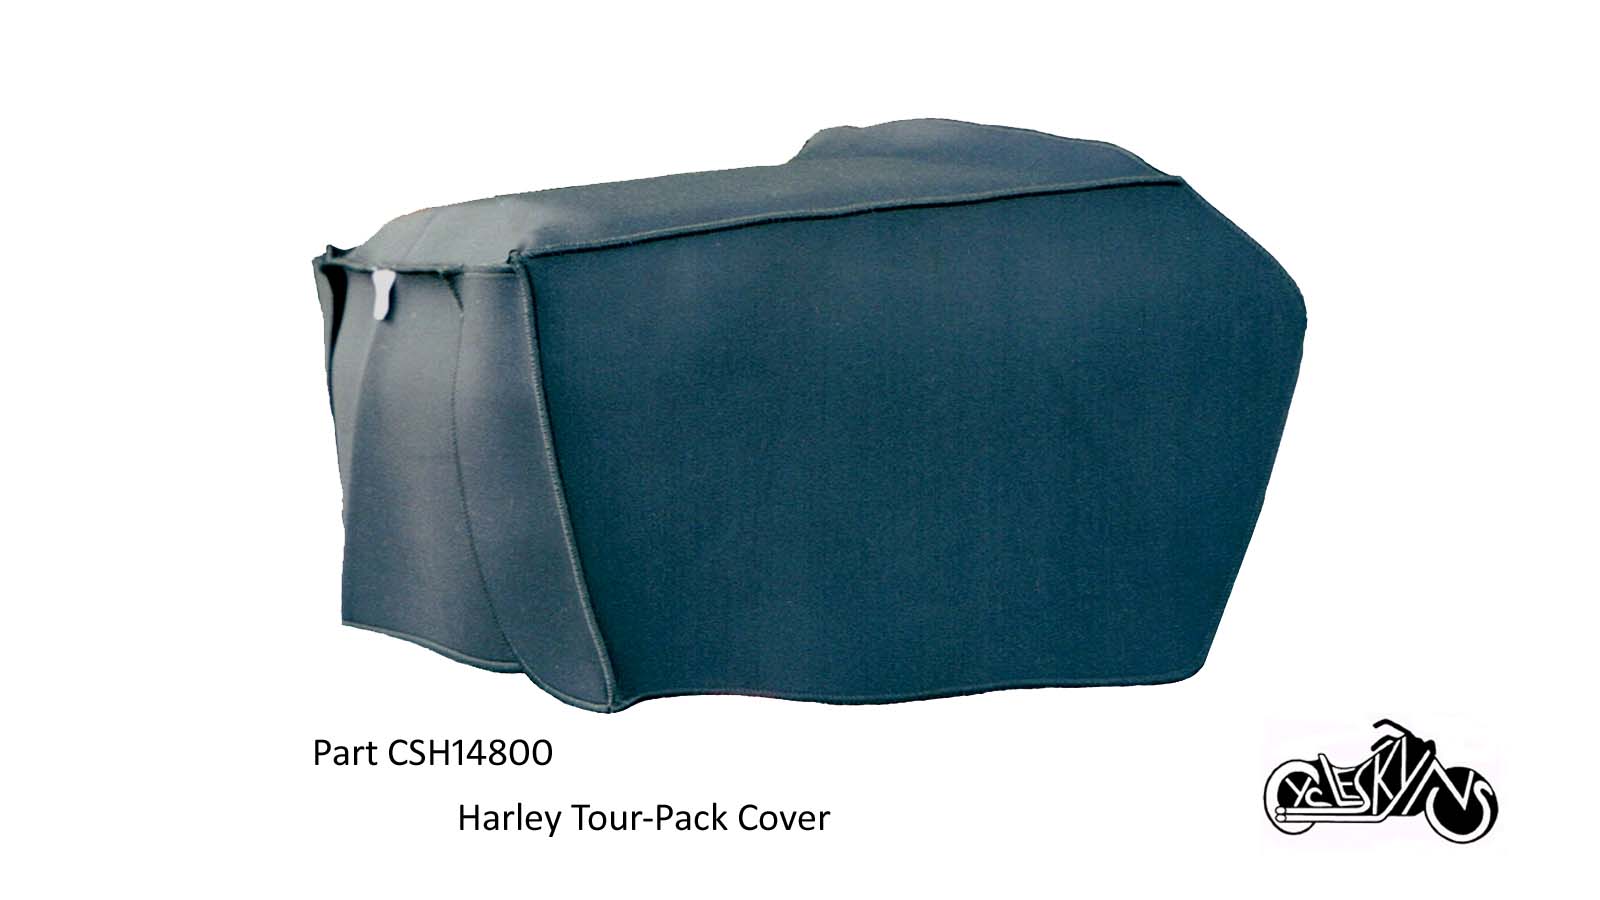 Neoprene Protective mechanic's Cover designed to cover the hard Tour Pack found on touring motorcycles by Harley Davidson.